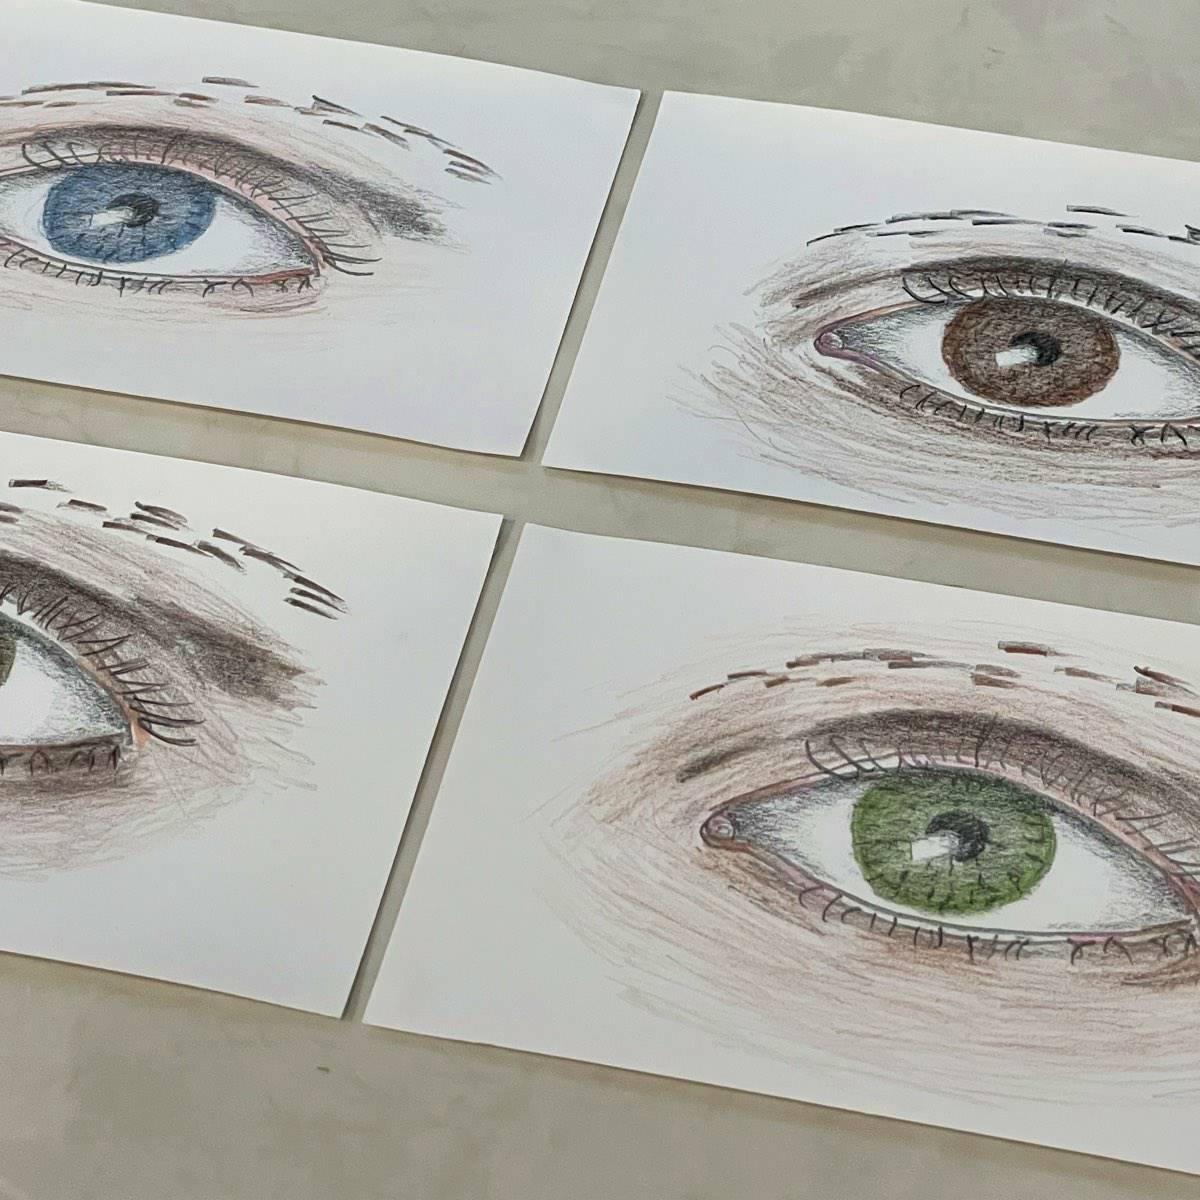 Colored pencil sketches of eyes up close on drawing paper.